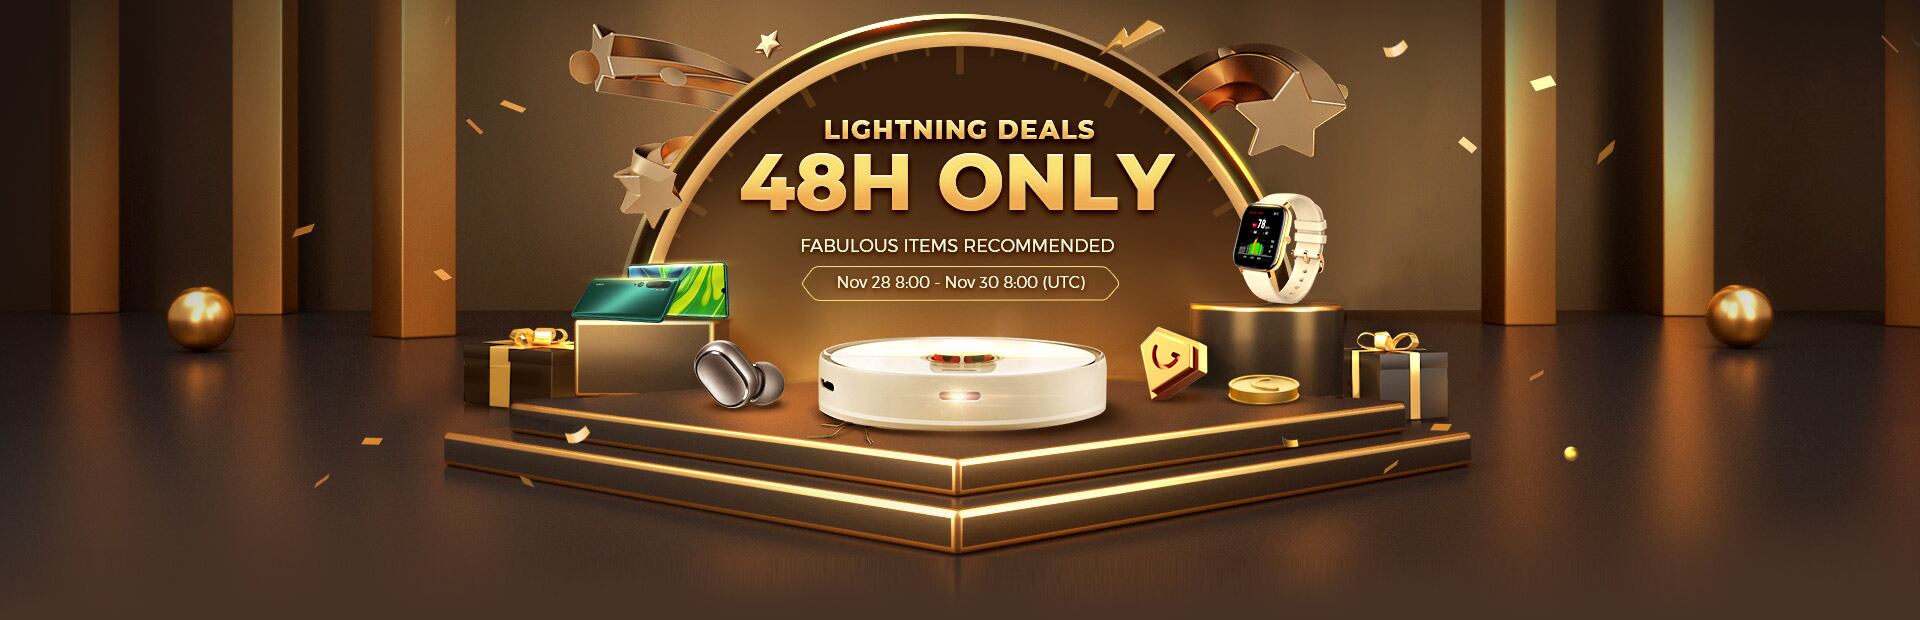 GearBest Black Friday 2019 - Lighting Deals - Only 48 Hours